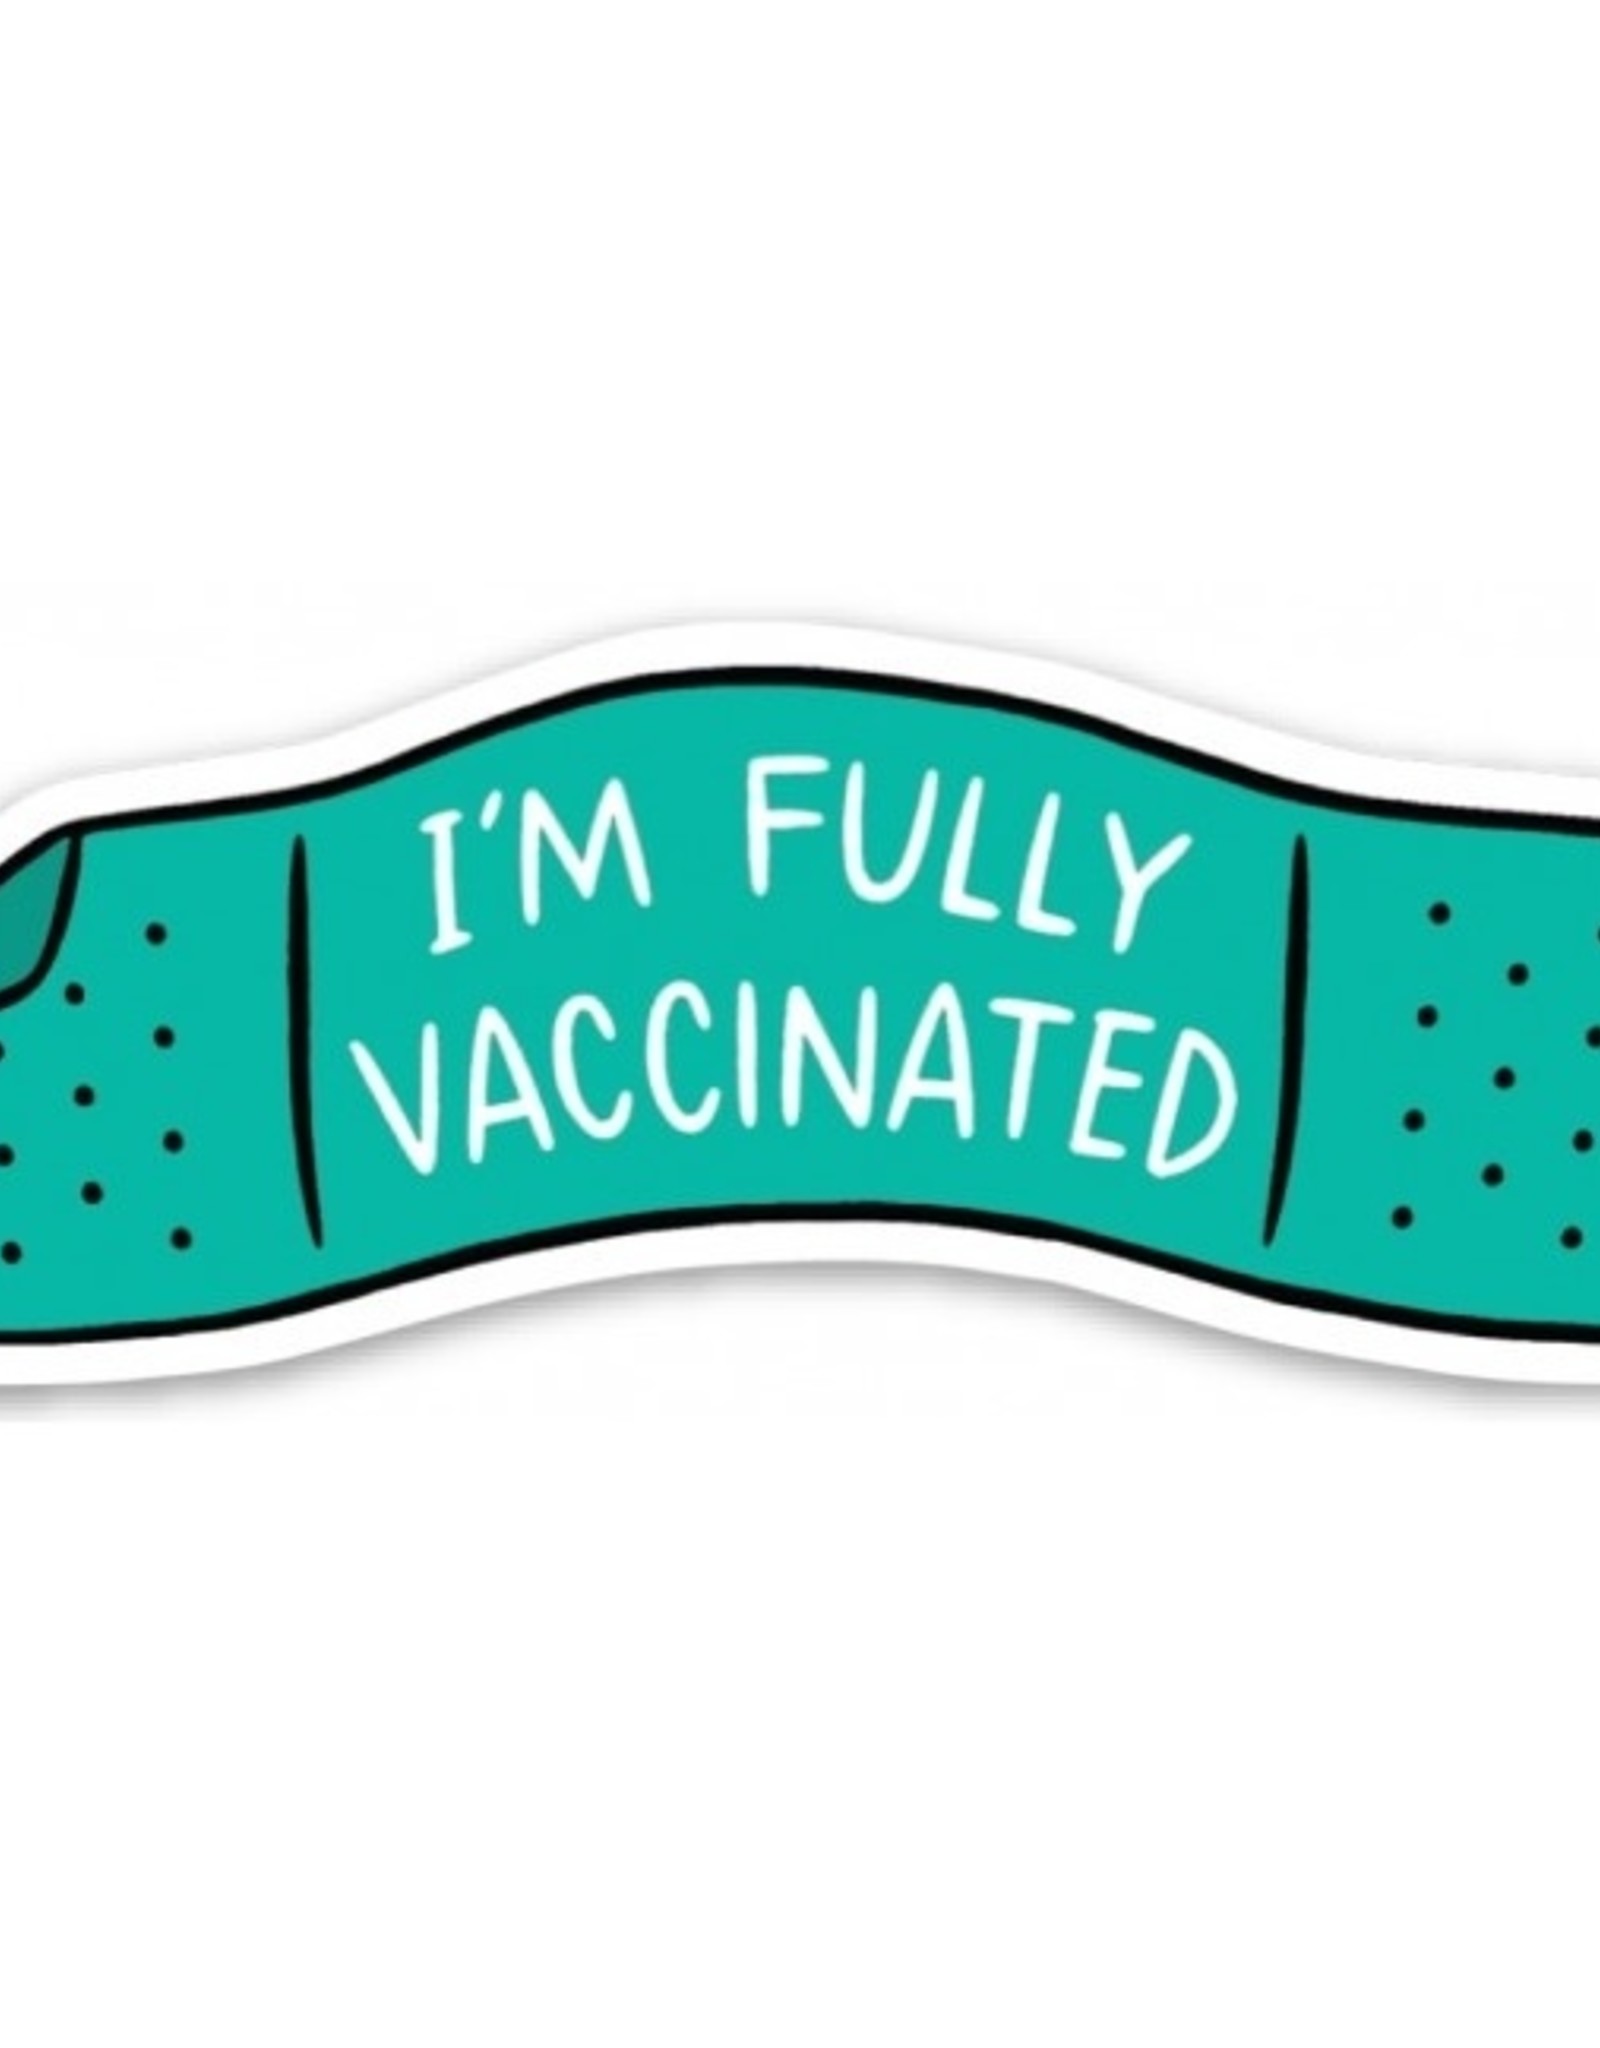 The Found Sticker: Vaccinated Band Aid